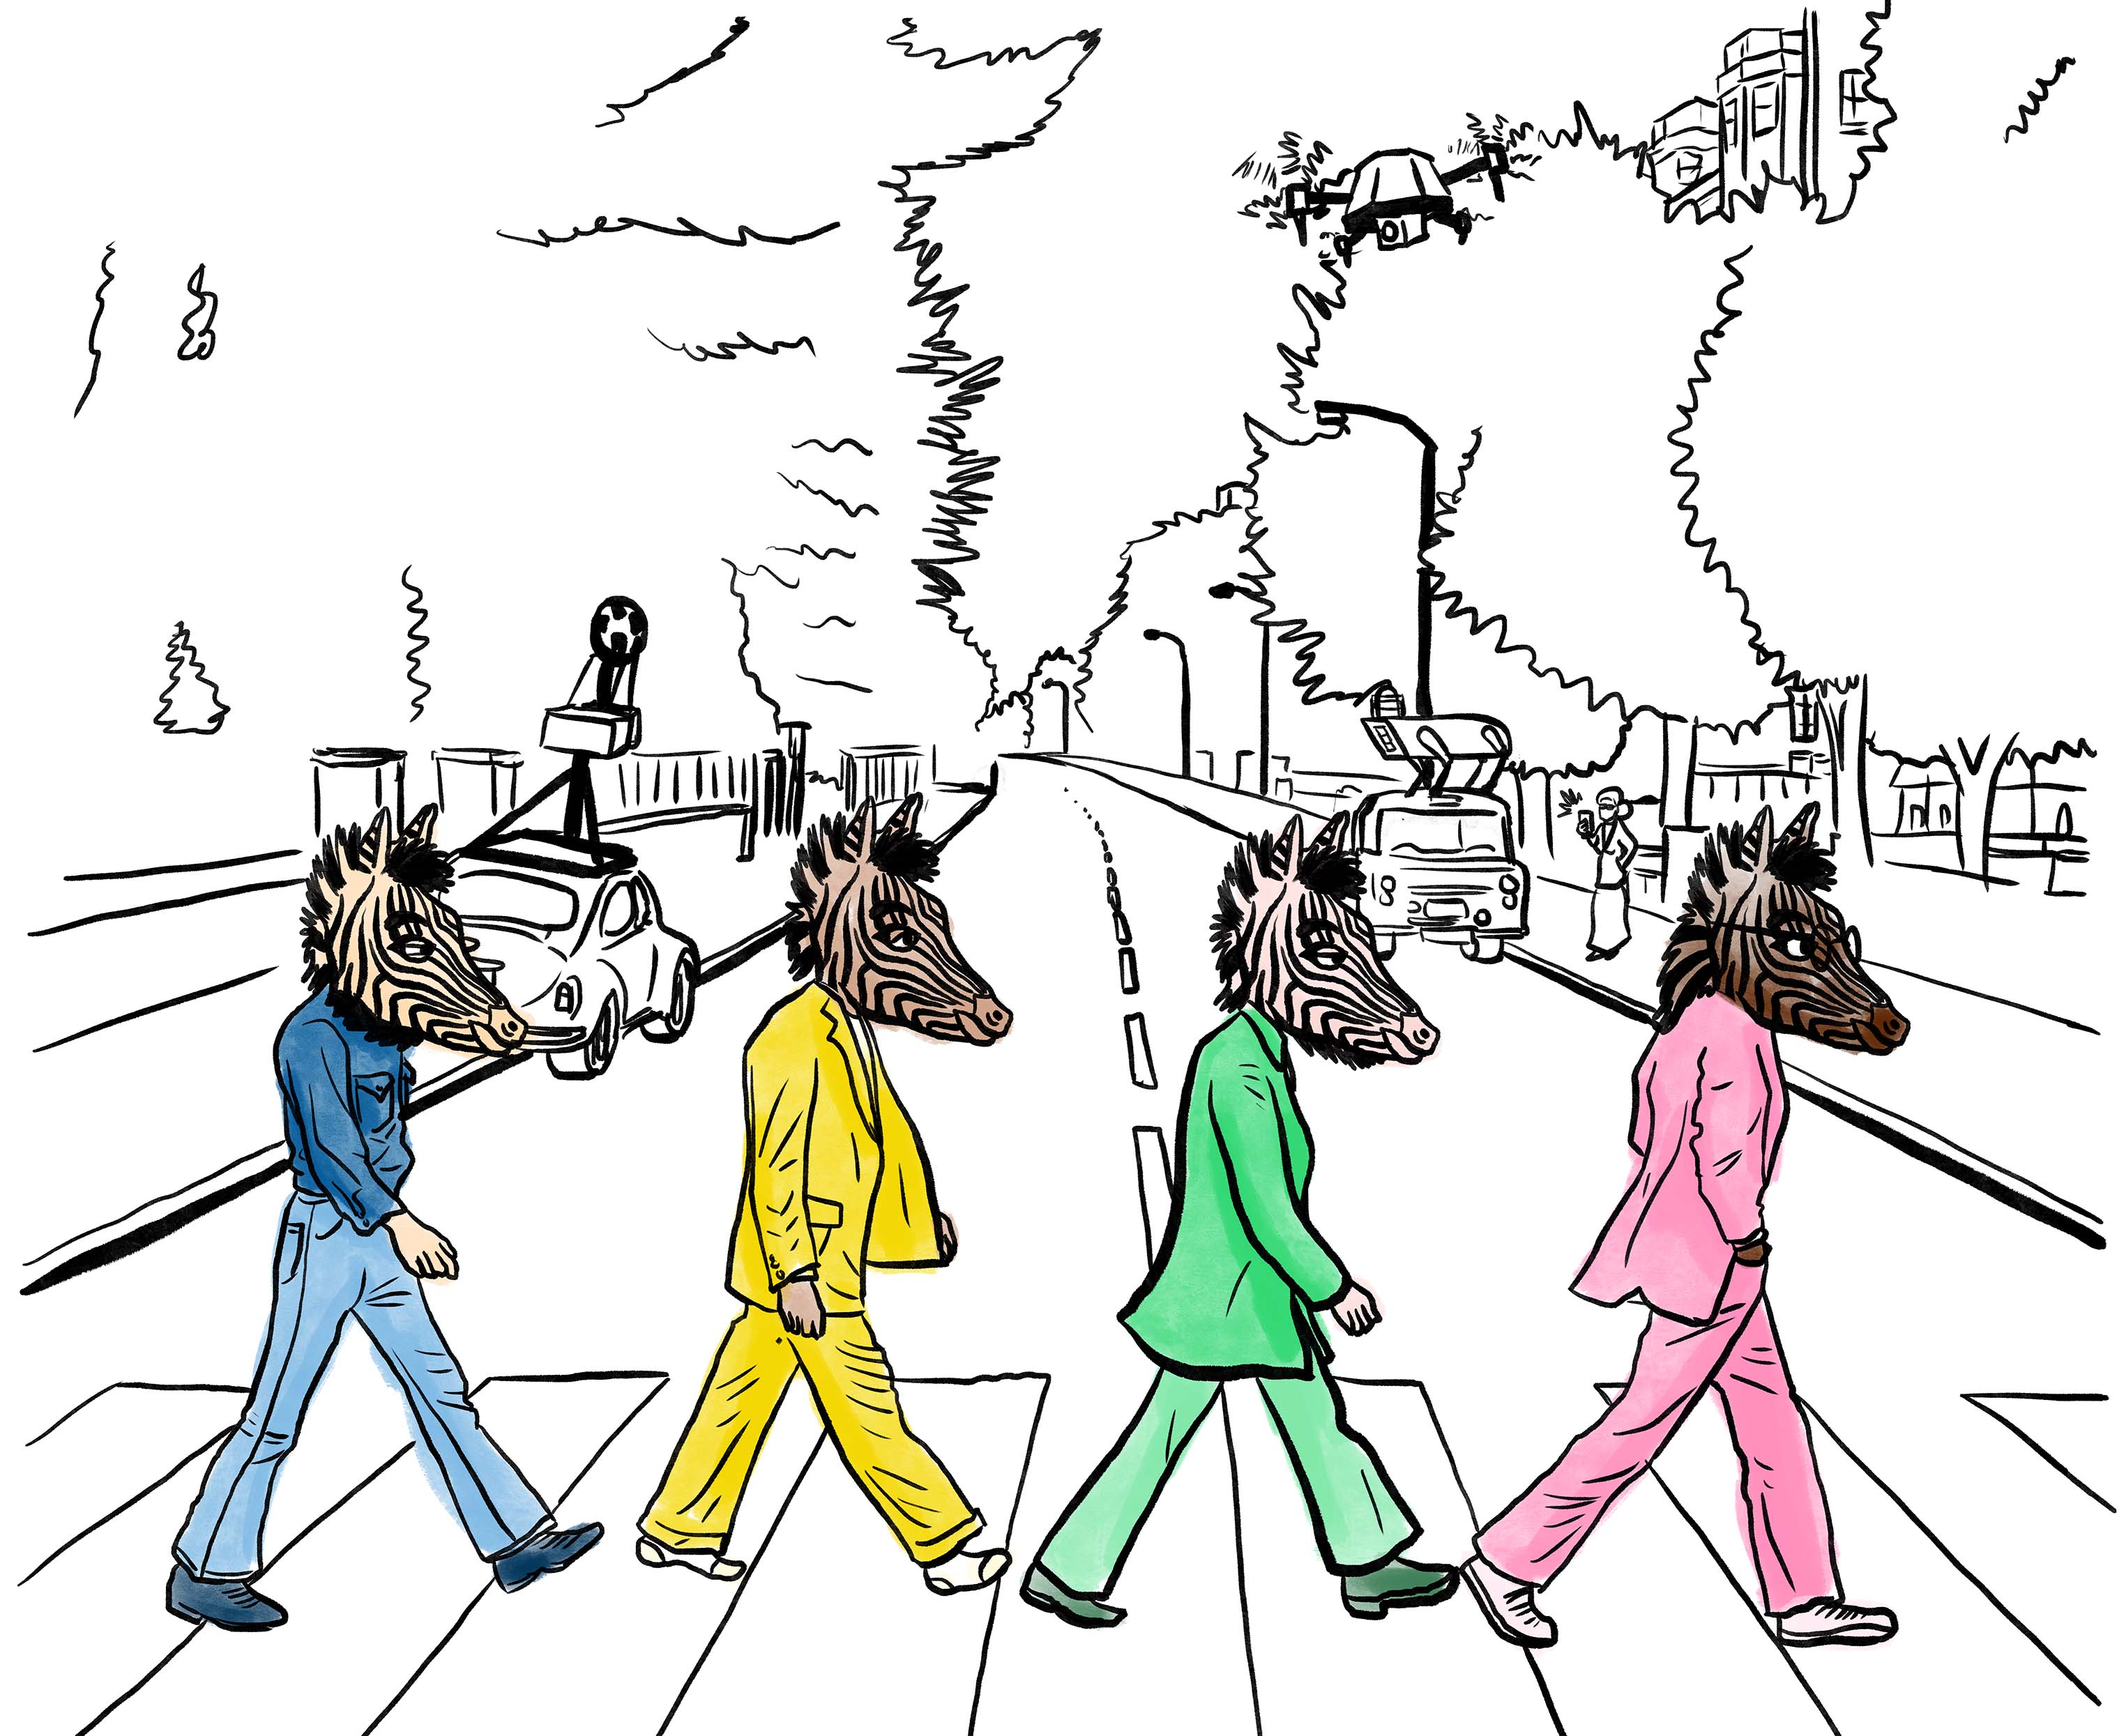 An illustration of four people with zebra heads crossing a zebra crossing in the same style and background as the Beatle's Abbey Road album cover except that there is a surveillance drone, Google Maps car and police robodog in the background